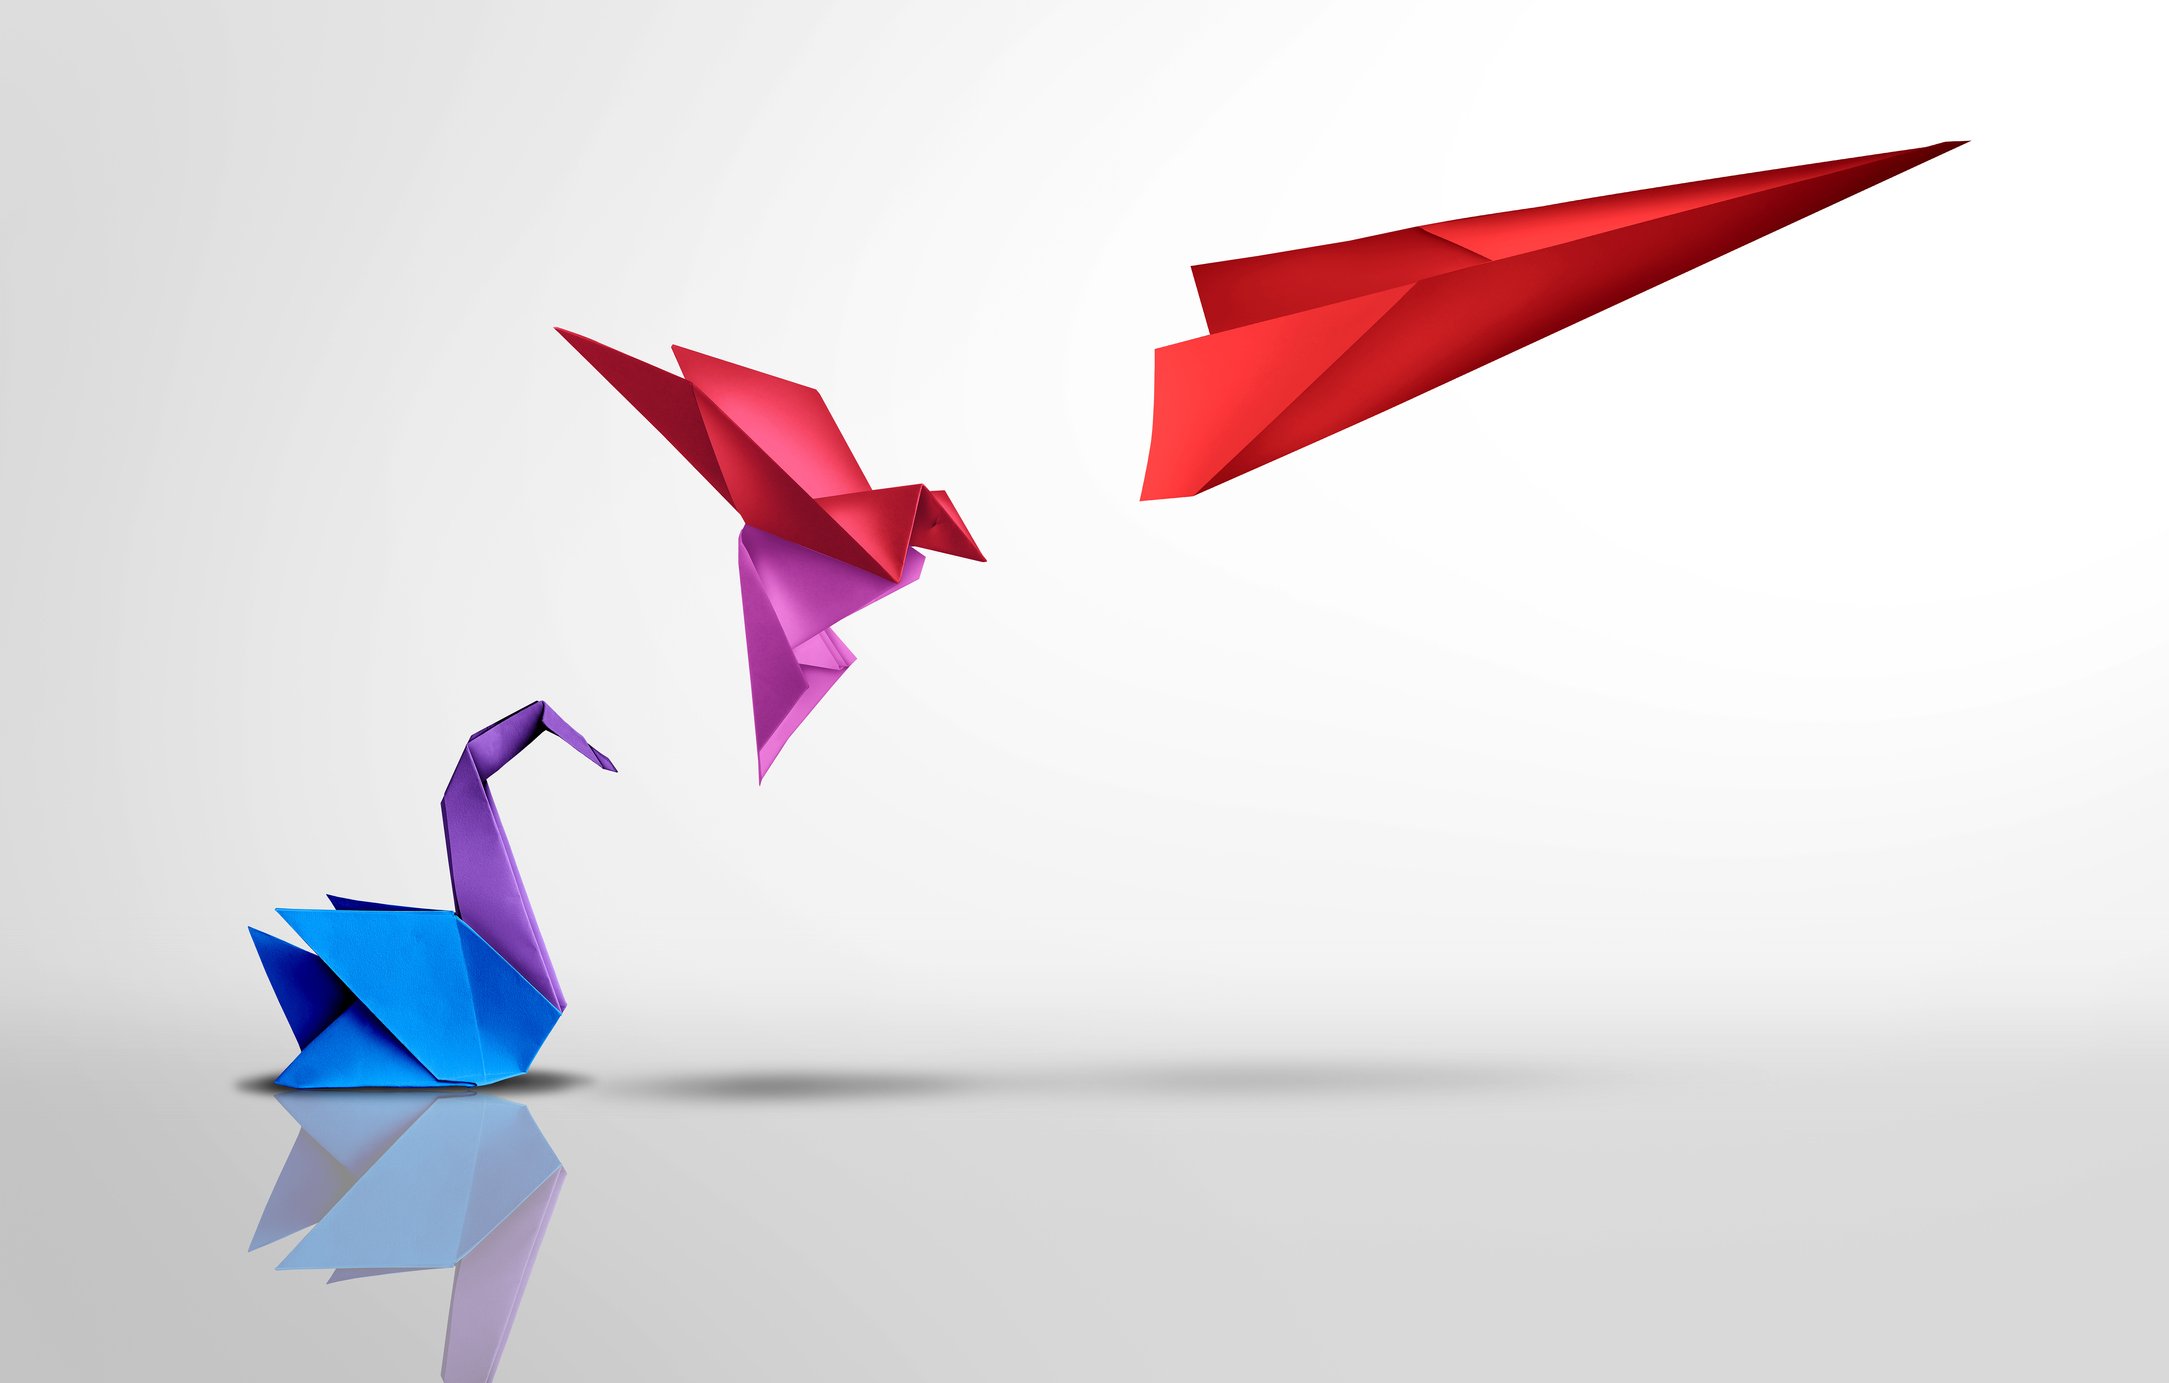 Graphic depicting transformation showing a paper swan then a paper hummingbird then a paper plane